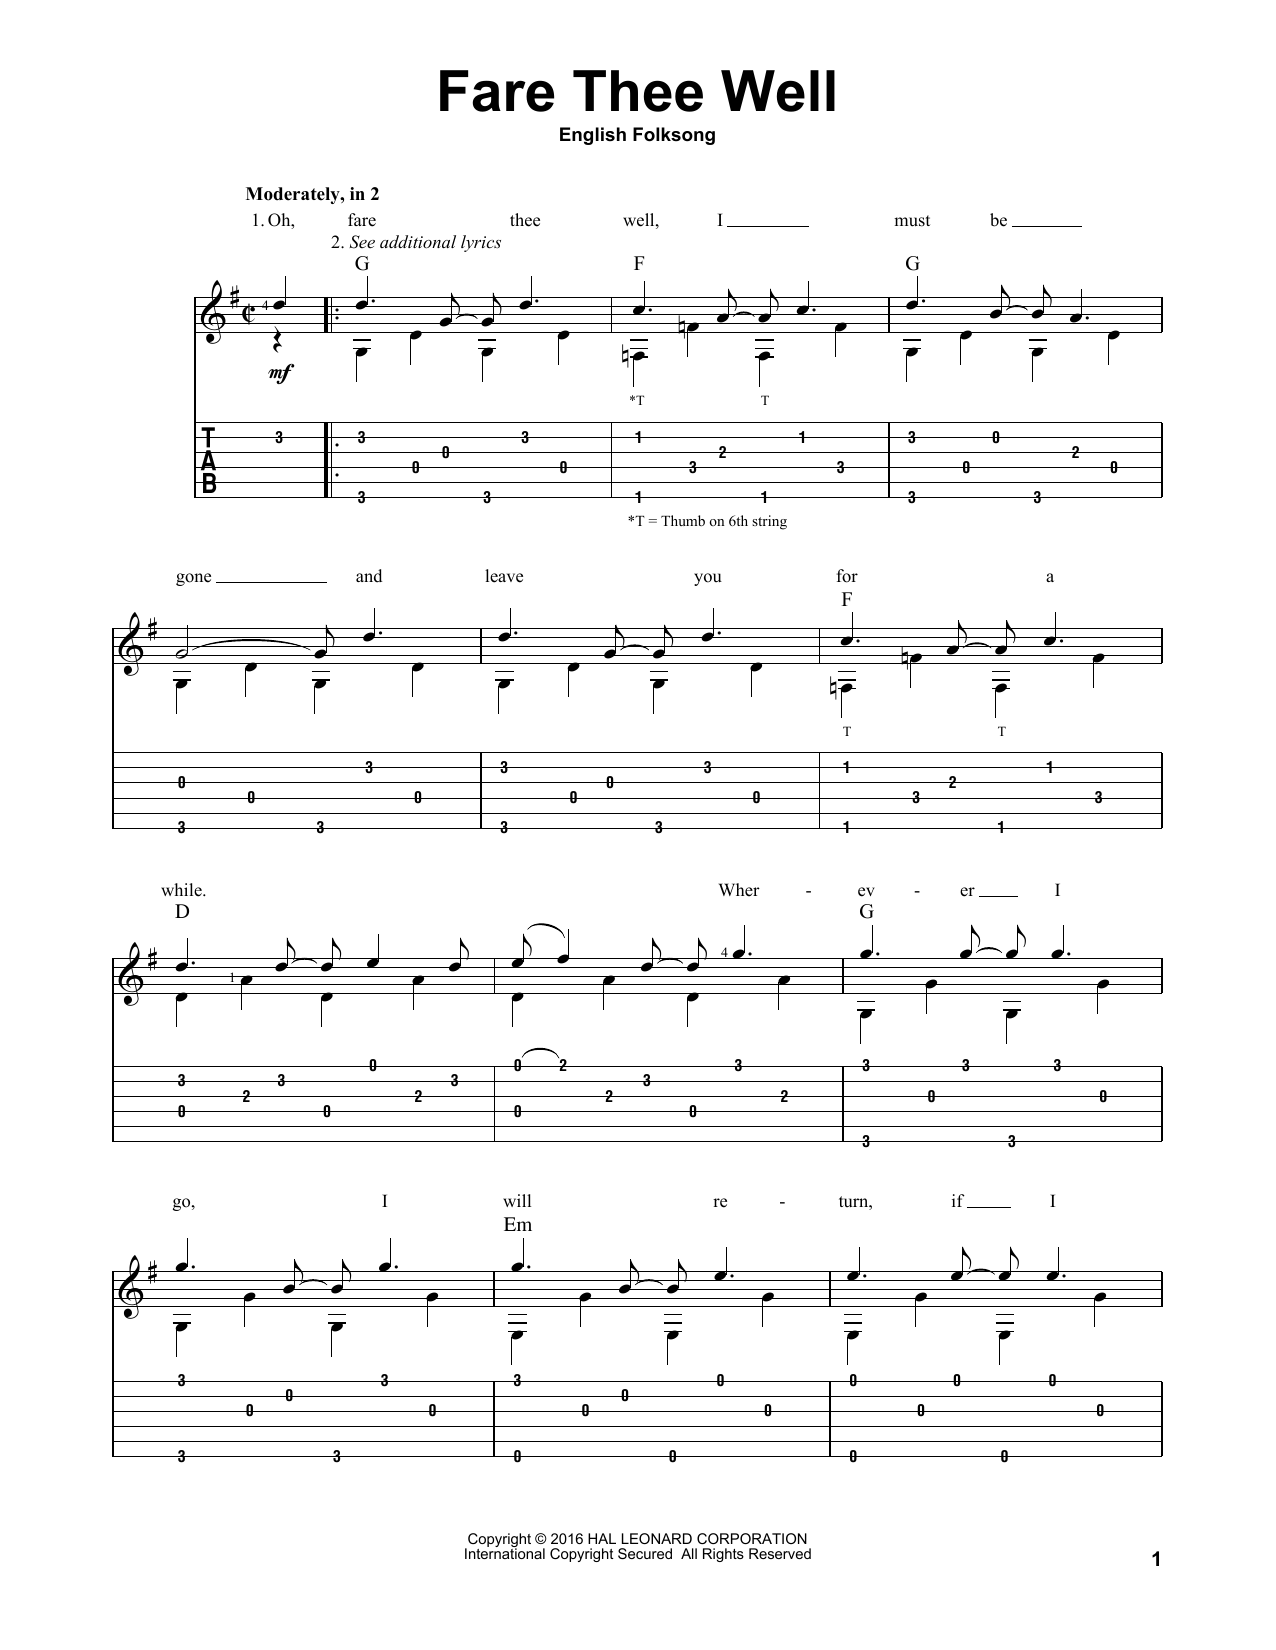 Download Traditional English Folksong Fare Thee Well Sheet Music